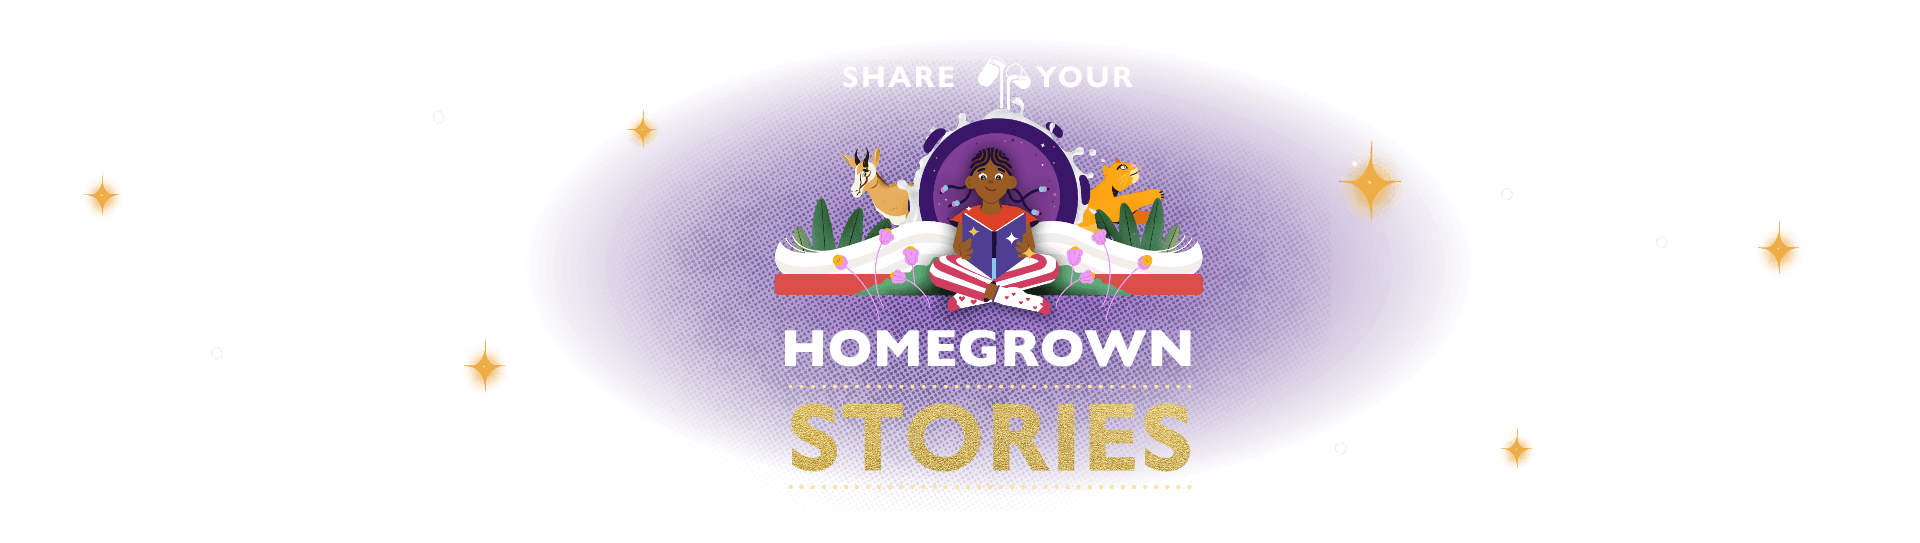 Terms and conditions  Share your Homegrown Stories